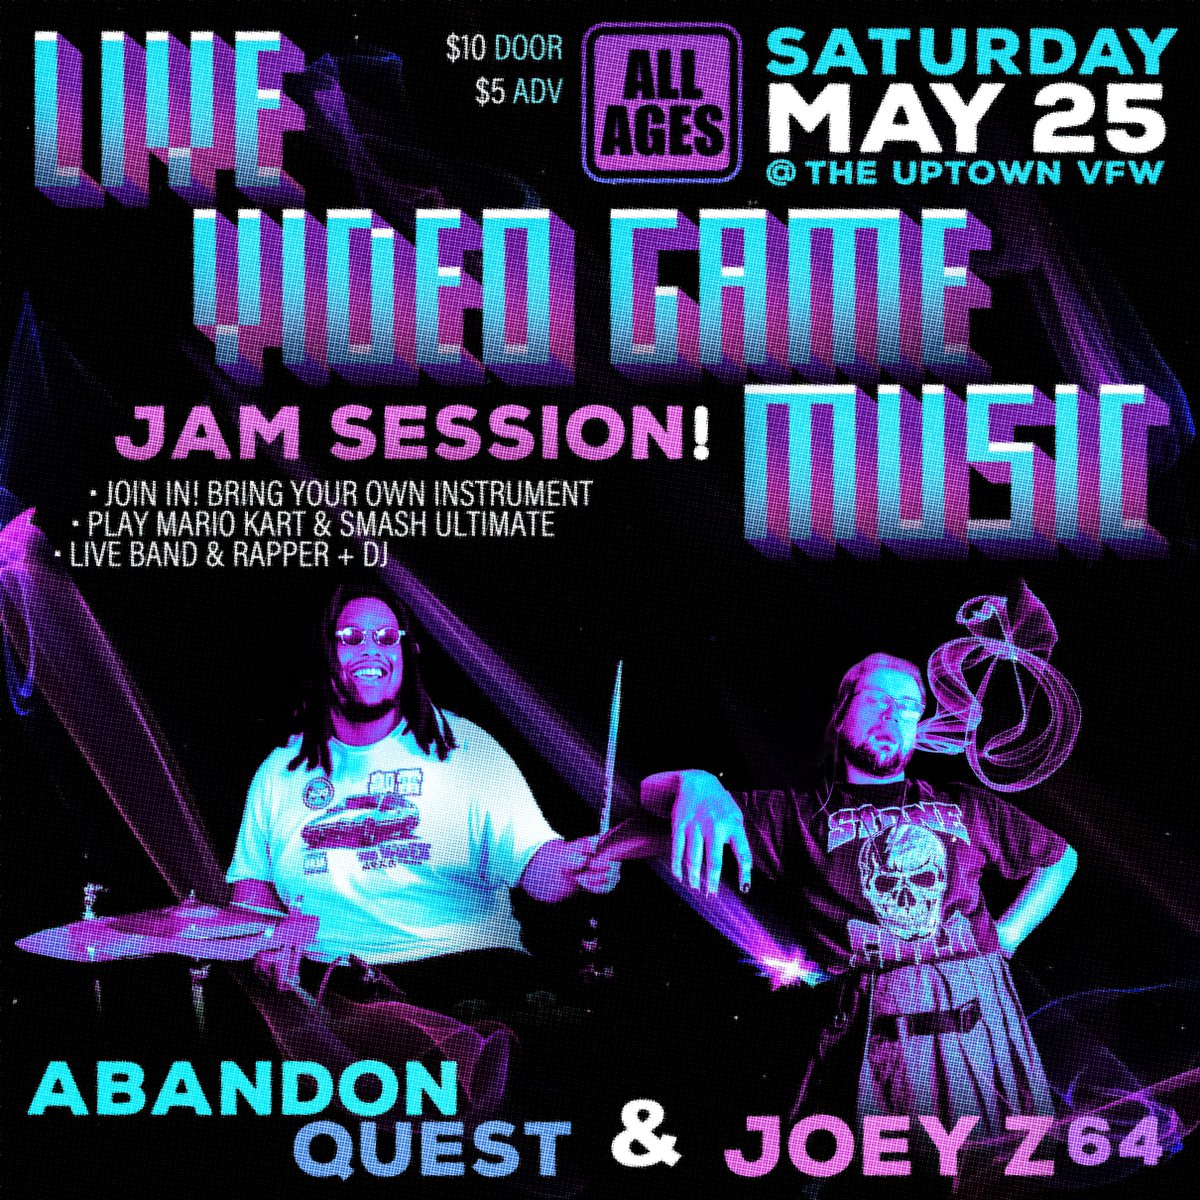 Don't Miss LIVE VIDEO GAME MUSIC: Jam Session with Abandon Quest and Joey Z64 on Saturday, May 25 -- BUY TICKETS ->> LIVE-VIDEO-GAME-MUSIC.eventbrite.com -- #uptownvfw #minneapolis #minnesota #mnmusic #jamsession #videogames #interactive #battlemusic #videogamemusic #allages